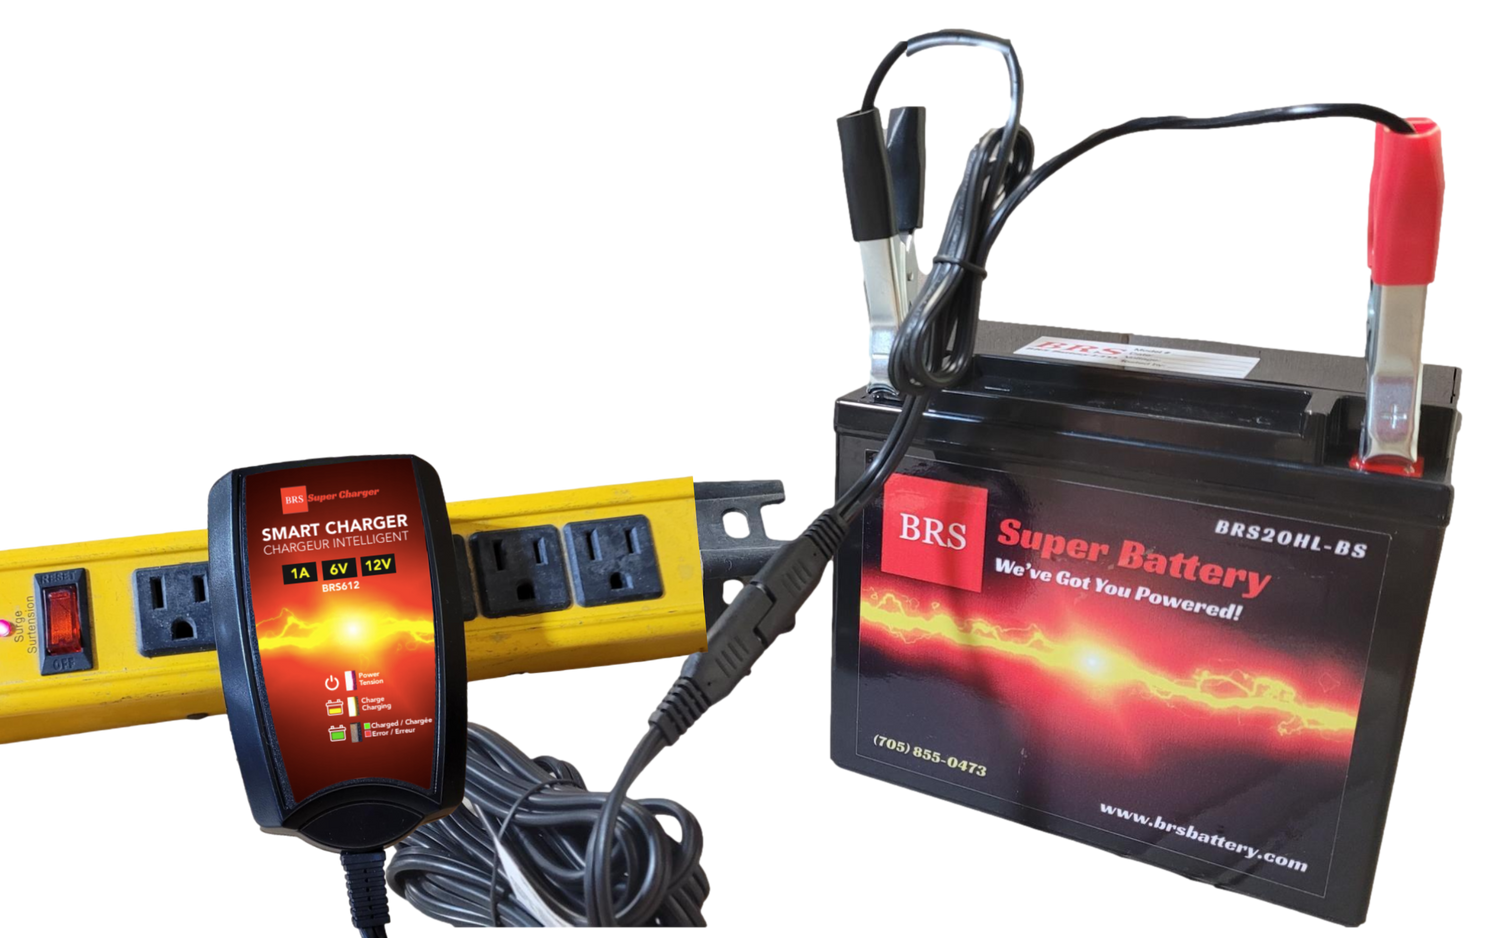 High Performance BRS20-BS 10 Year Battery & Smart Charger / Maintainer Combo Bundle Kit 12v Sealed AGM PowerSports Battery - BRS Super Battery